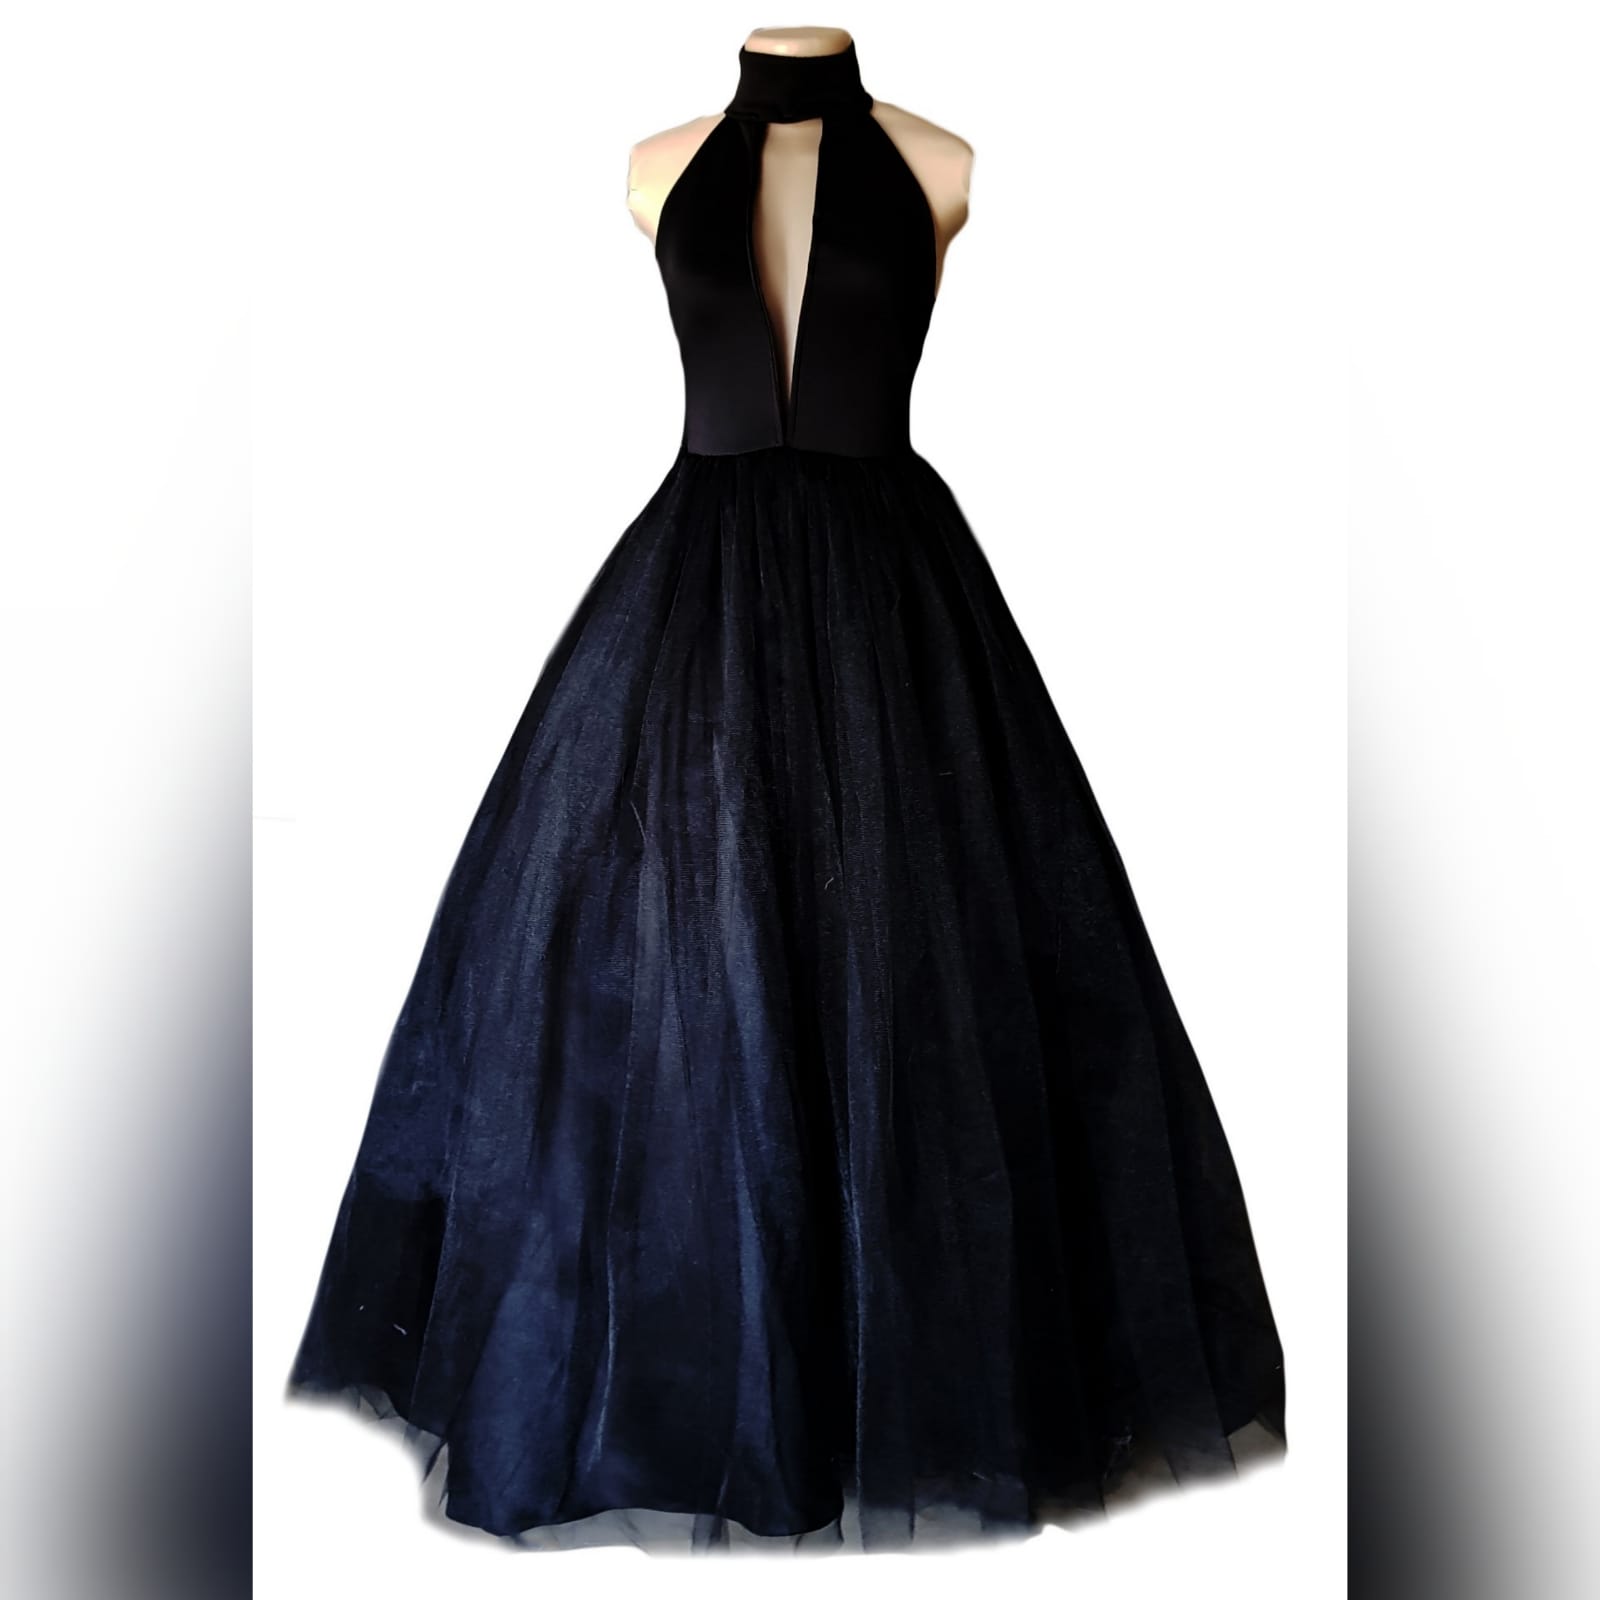 Black tulle prom ball gown 2 black tulle prom ball gown with an illusion plunging neckline and choker, backless design creating a v, with a full long tulle bottom.